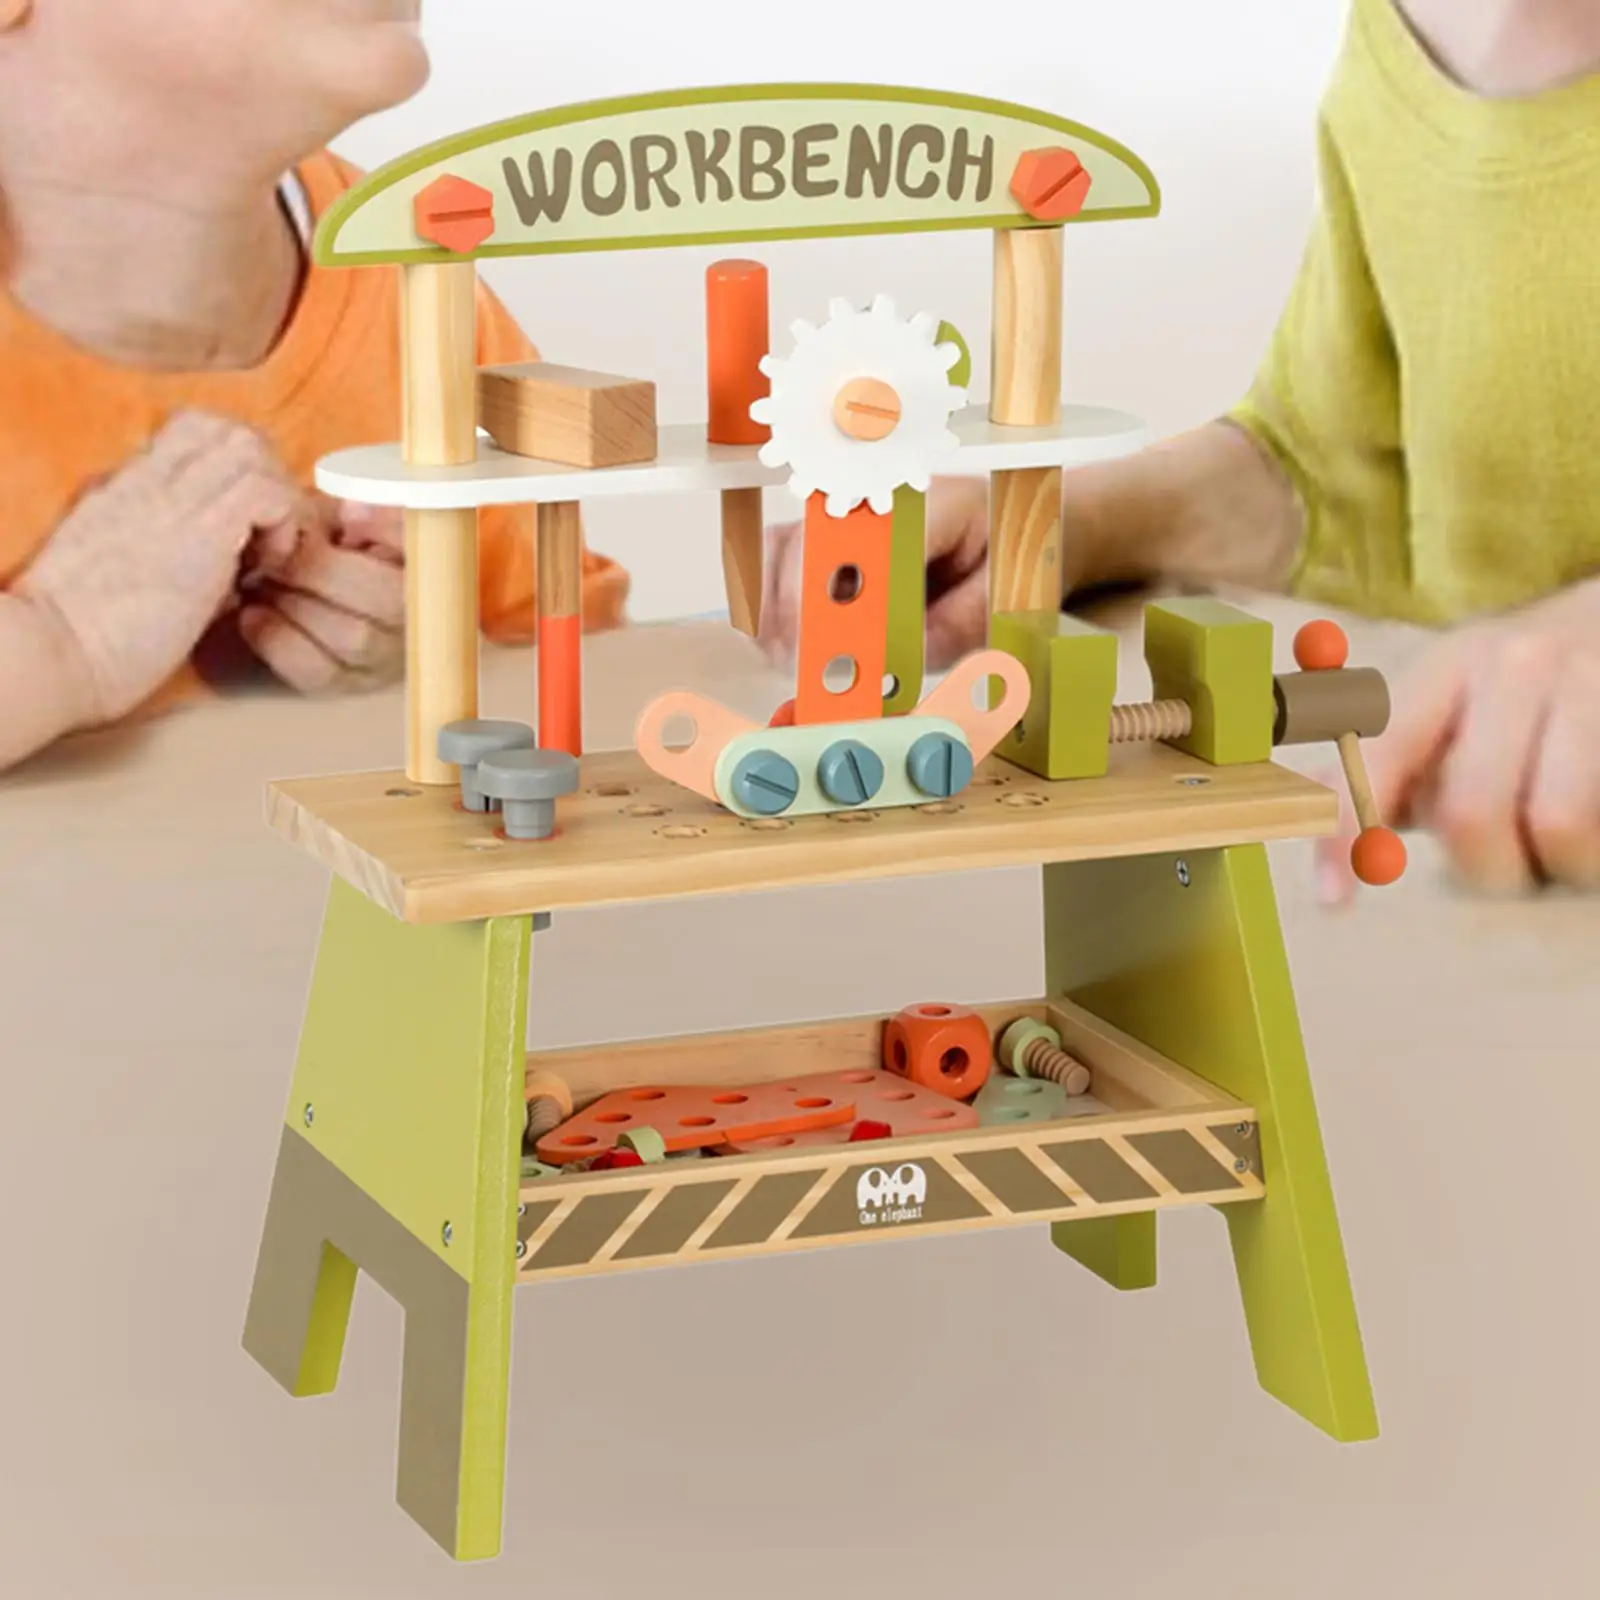 Kid`s Wooden Tool Bench Toy Educational Simulation Durable Children Repair Play Tool Set for Ages 3+ Girls Boys Easy to Assemble